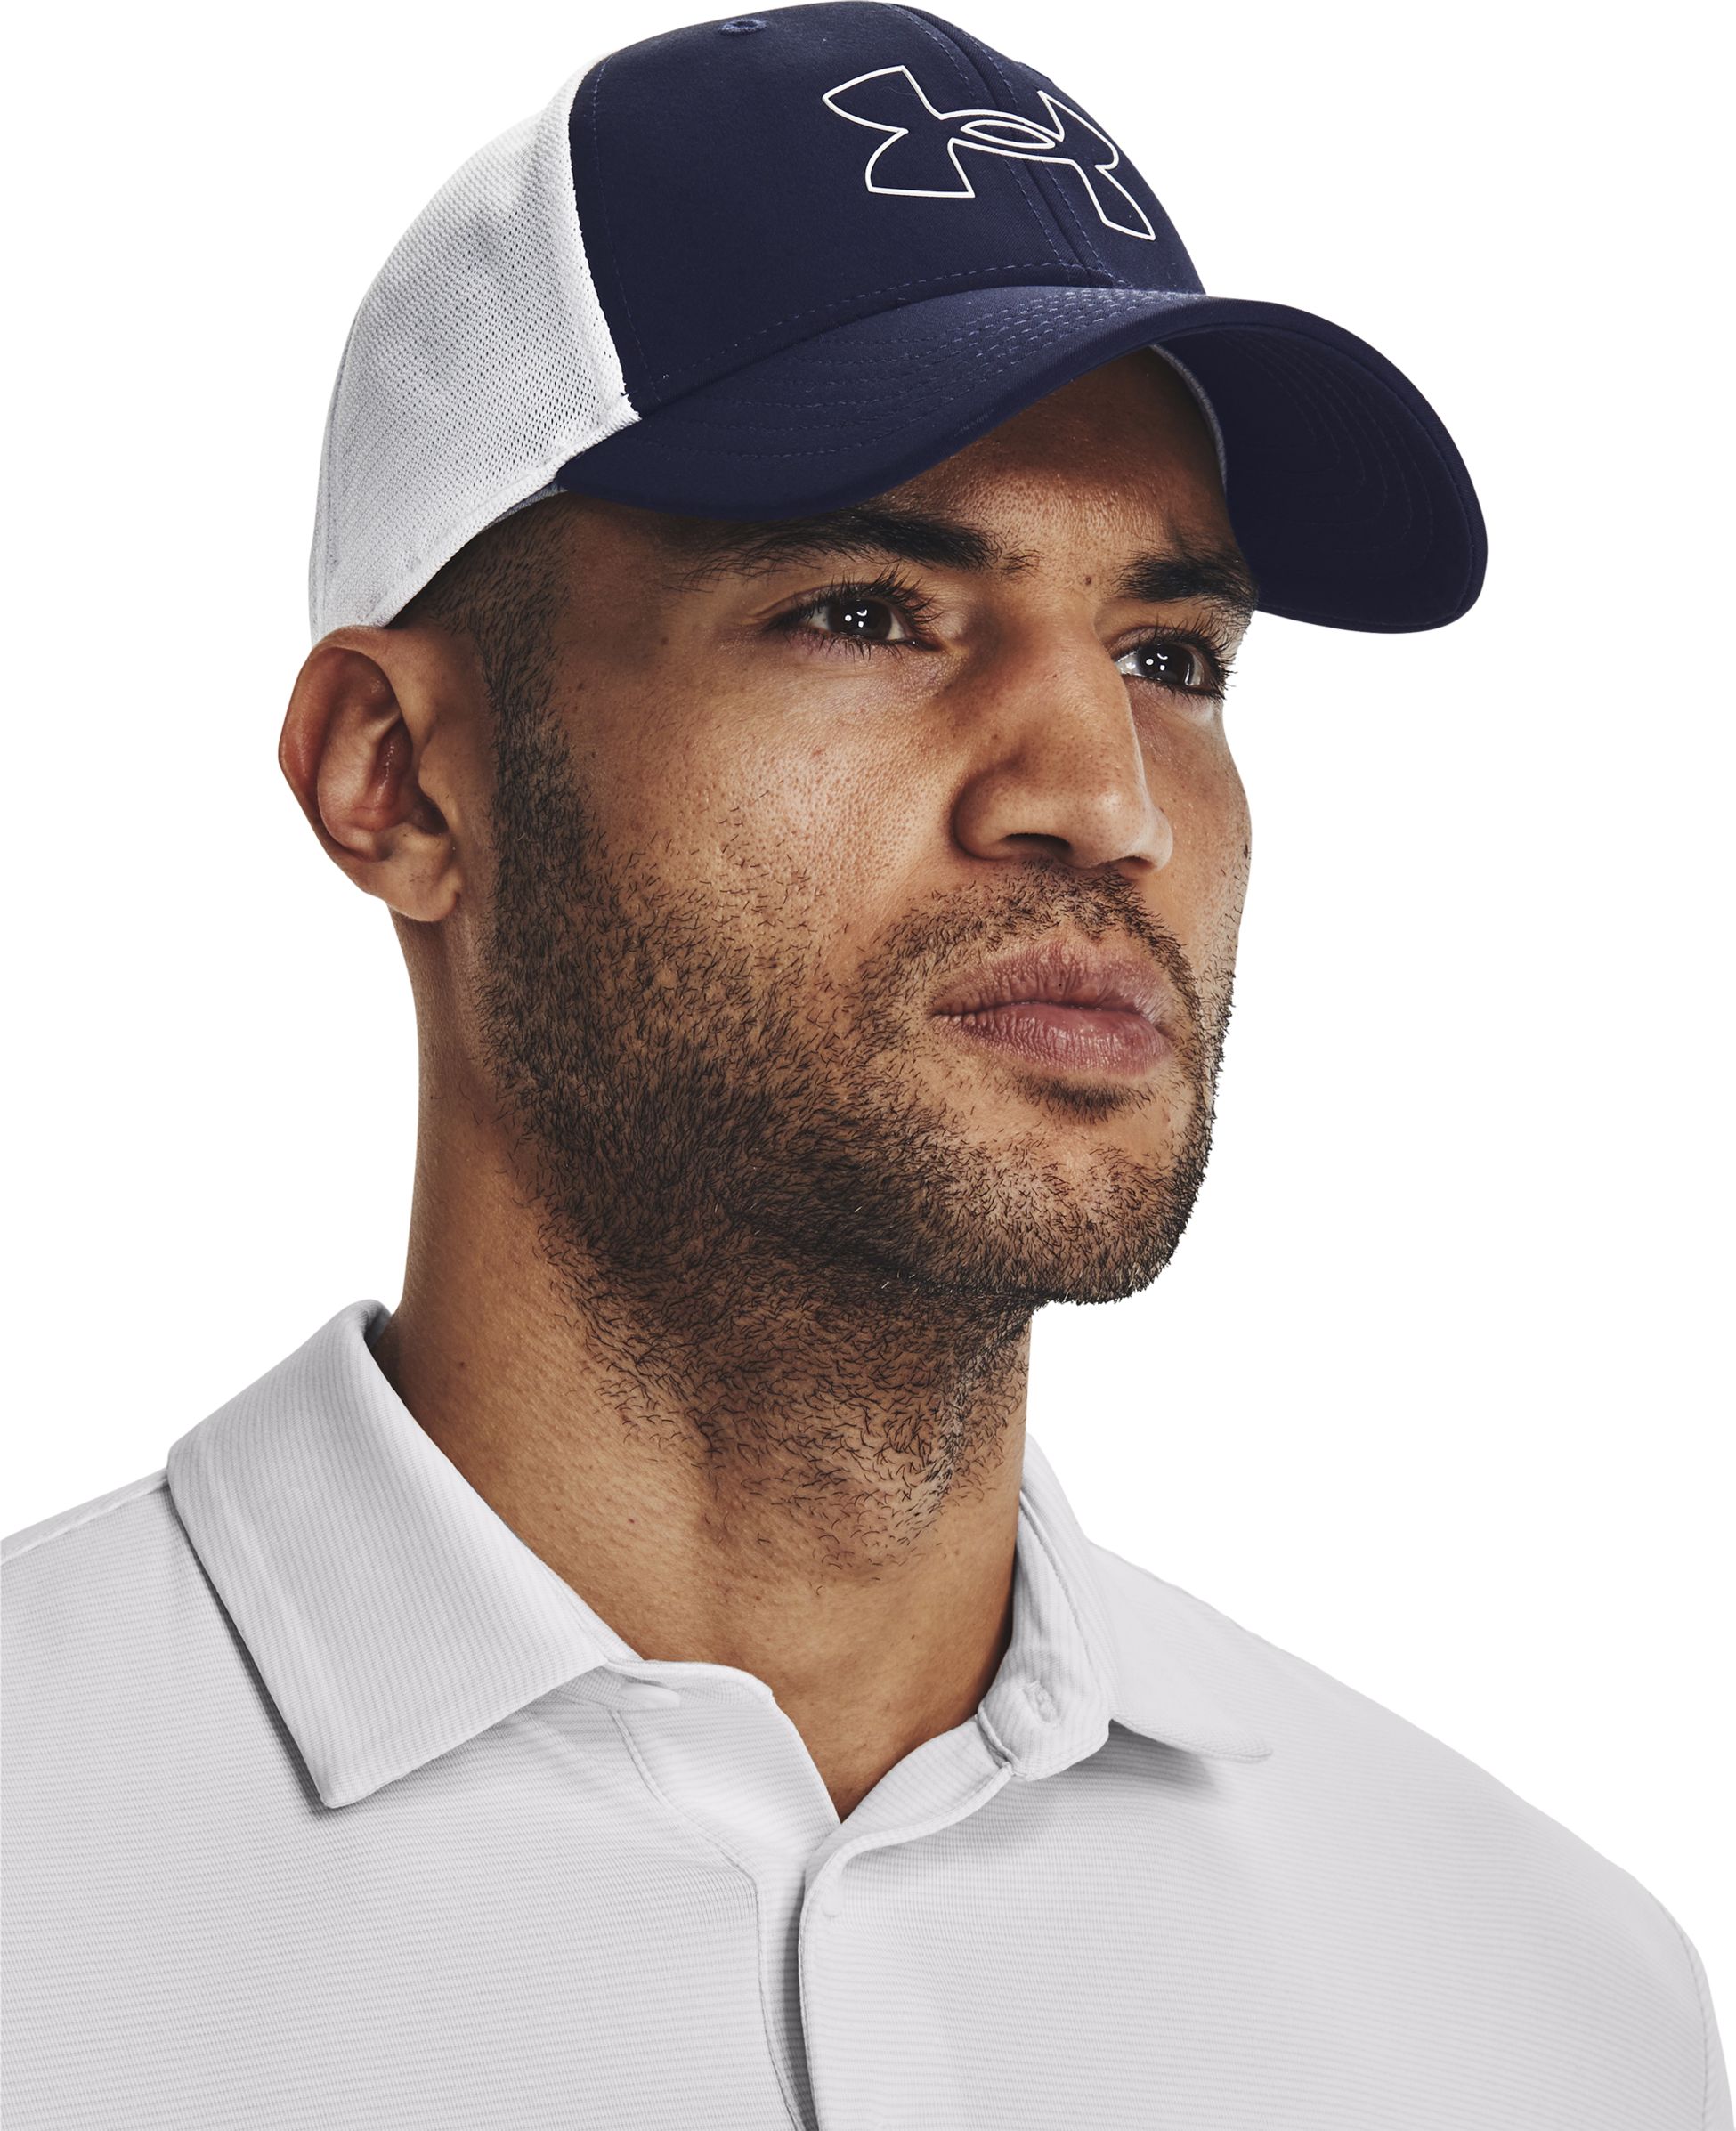 UNDER ARMOUR, ISO-CHILL DRIVER MESH CAP